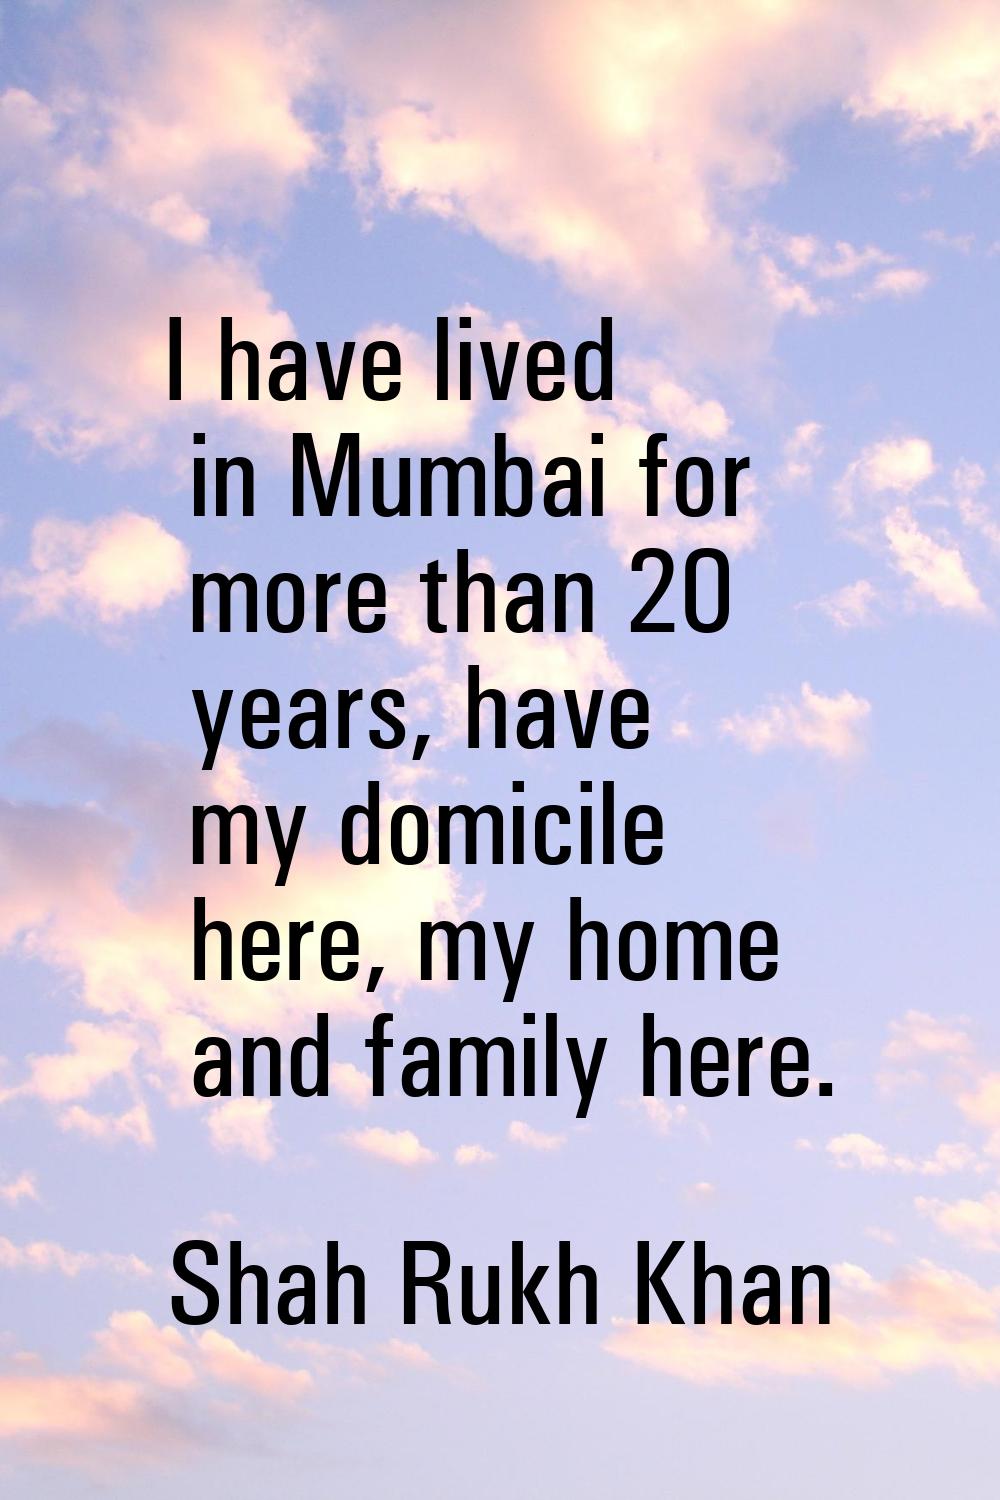 I have lived in Mumbai for more than 20 years, have my domicile here, my home and family here.